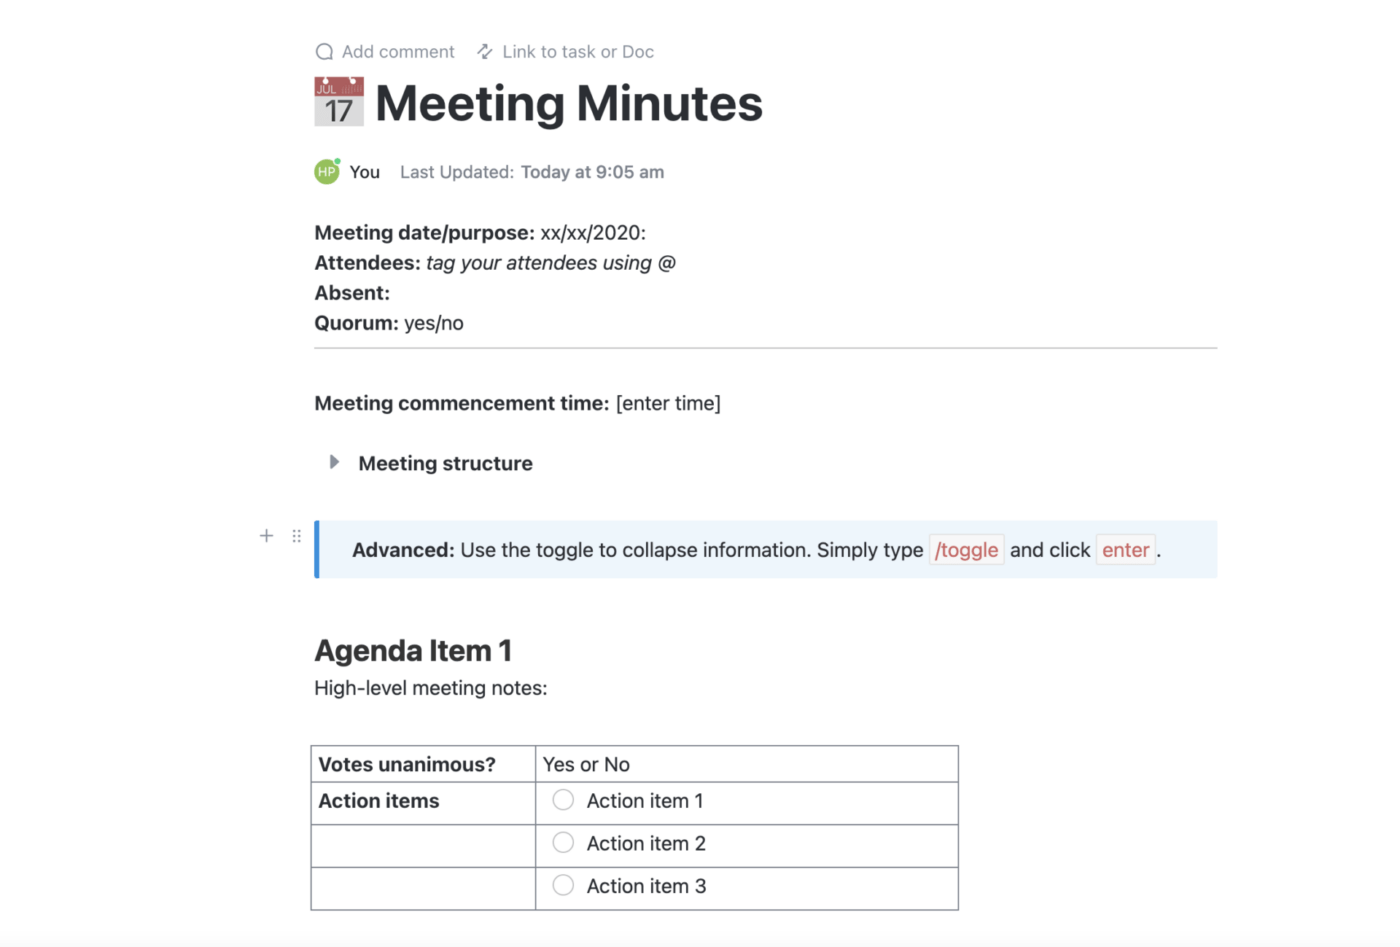 Board of Directors Meeting Minutes Template by ClickUp